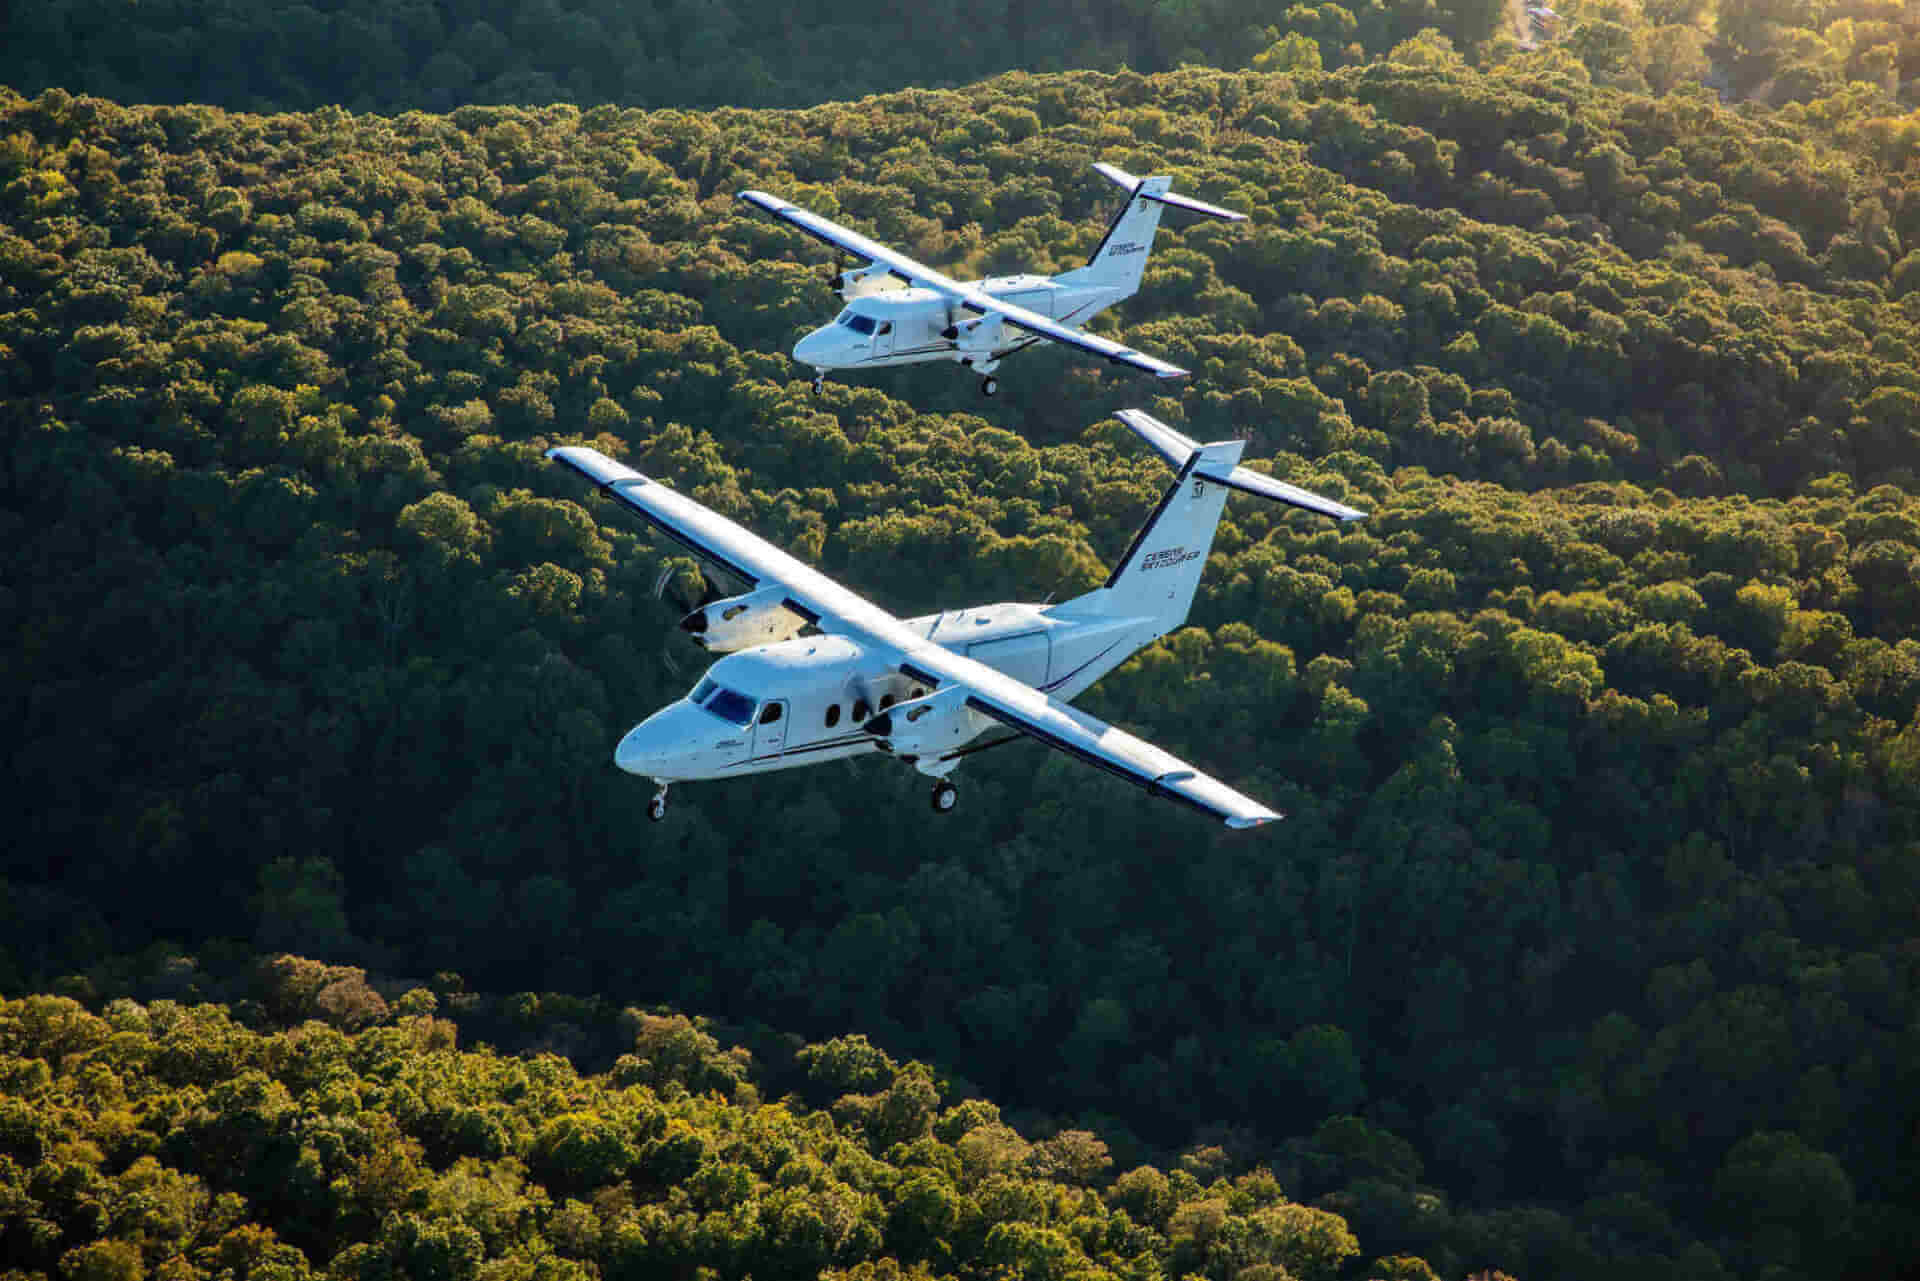 Textron Aviation secures ANAC certification for Cessna SkyCourier, paving the way for sales in Brazil